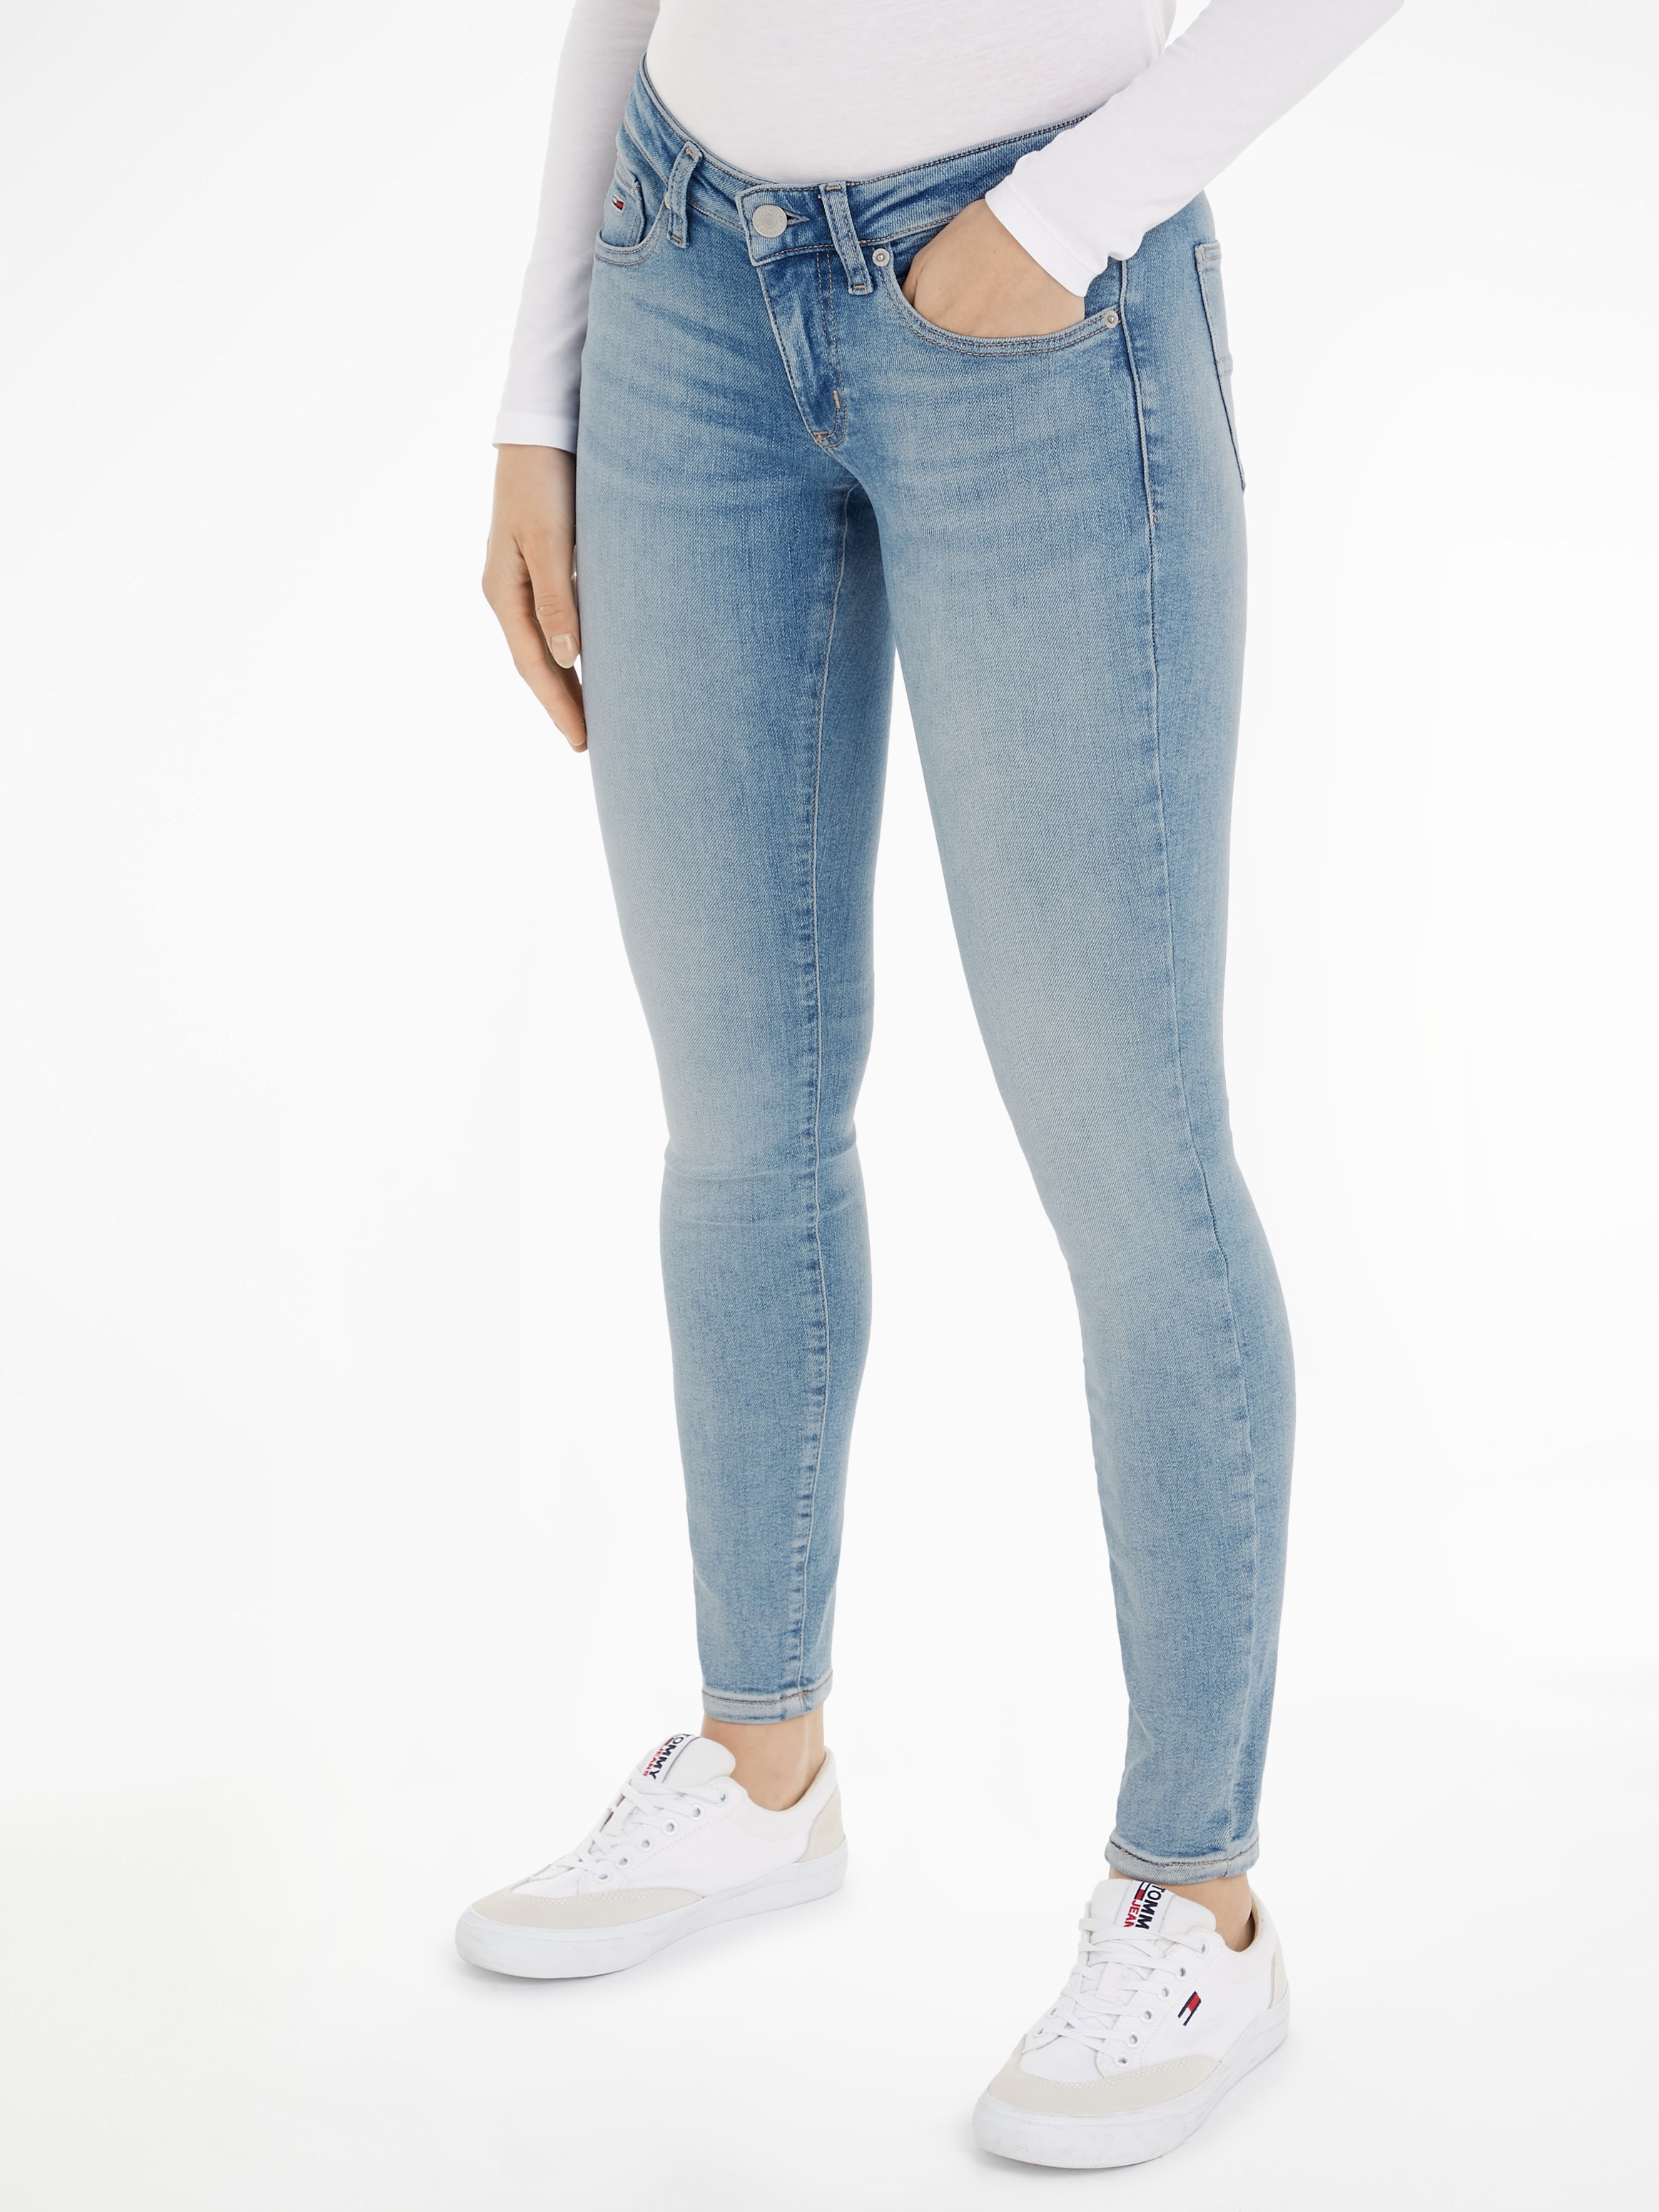 Tommy Jeans Skinny-fit-Jeans »Tommy Jeans Damenjeans Low Waist Skinny«, mit Waschung, Logo-Badge